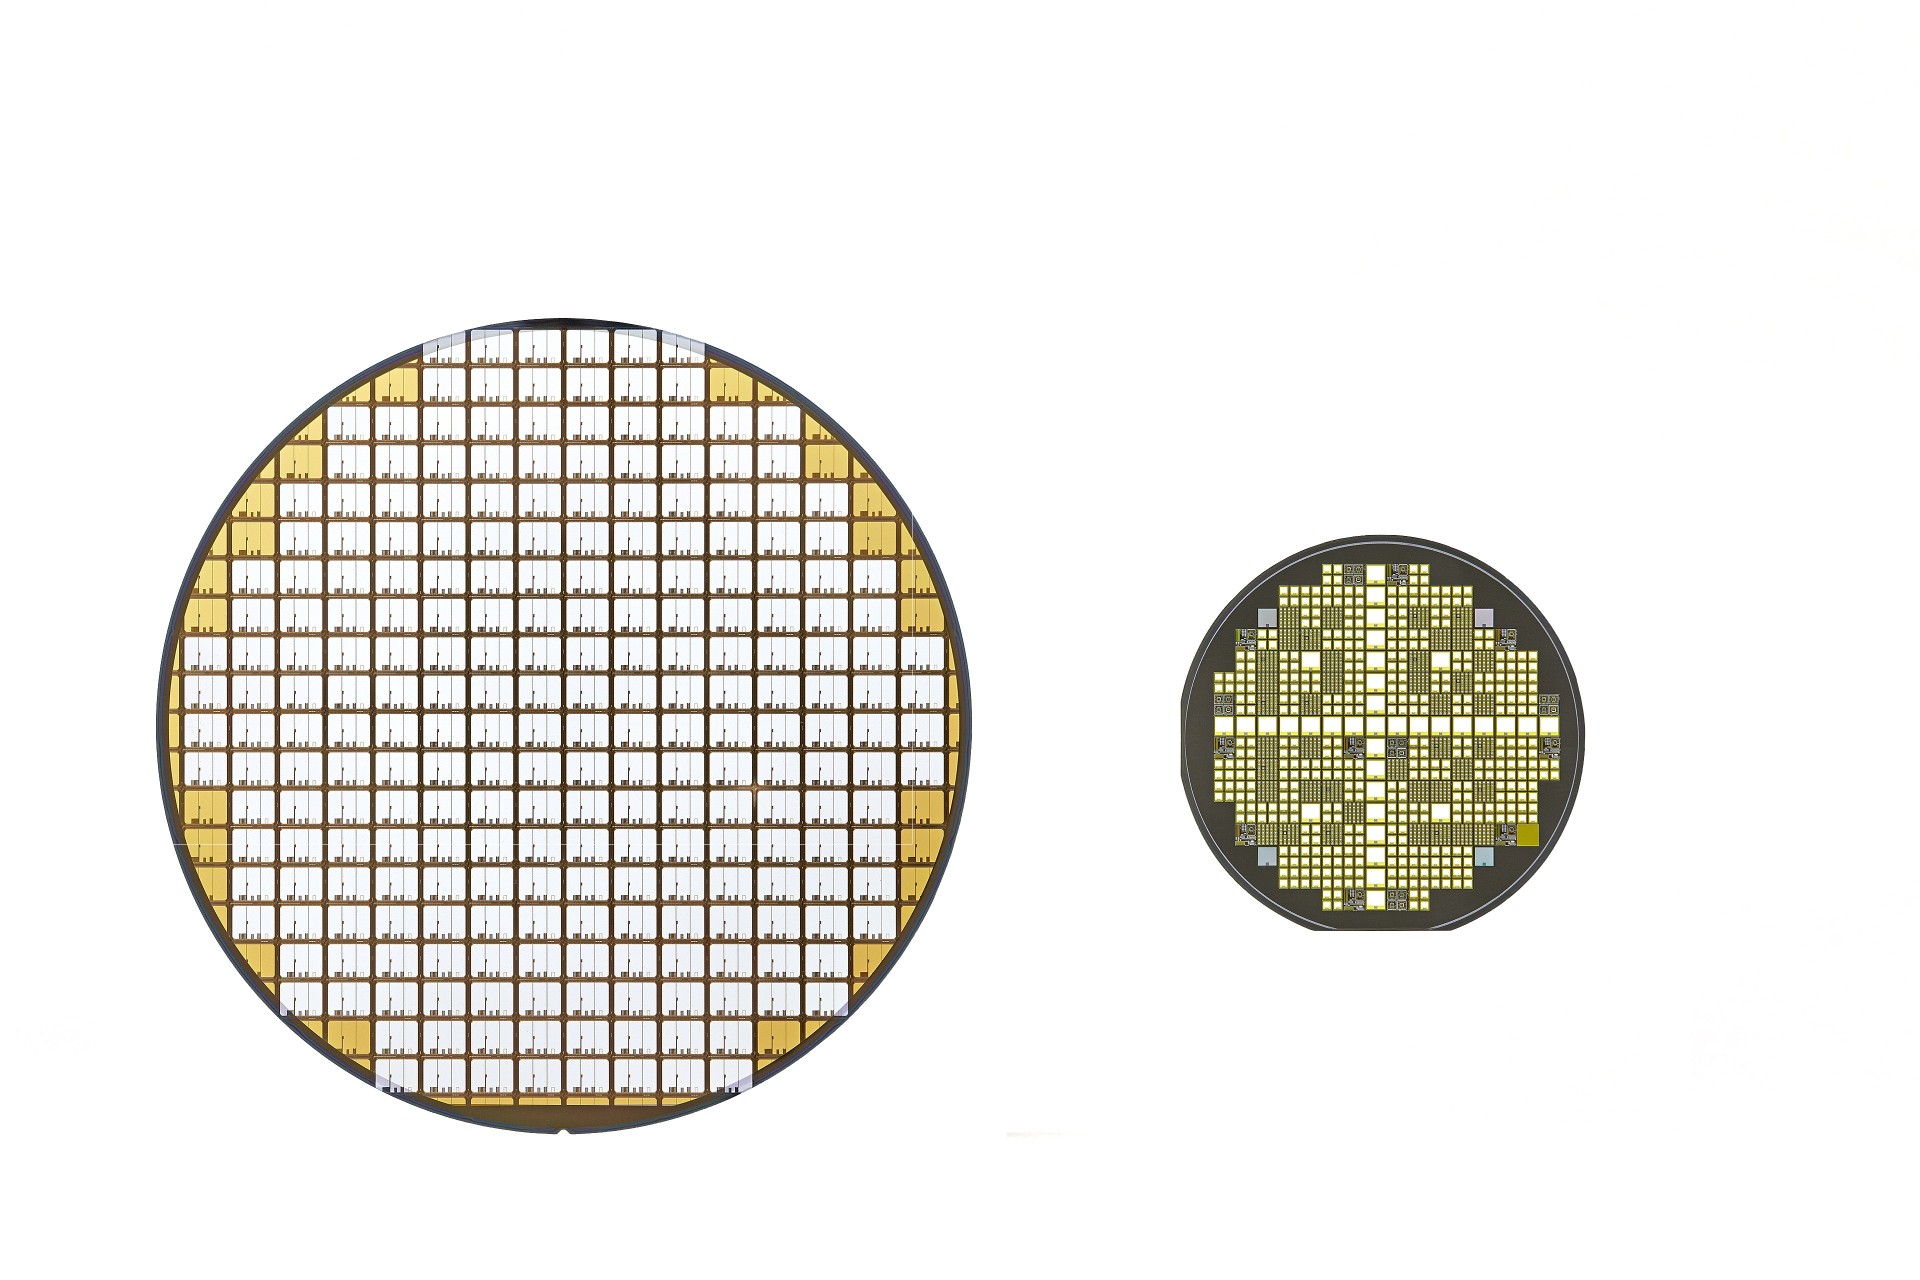 Left:<br>Silicon power semiconductor wafer (transistor)<br>Right:<br>SiC power semiconductor wafer (transistor)